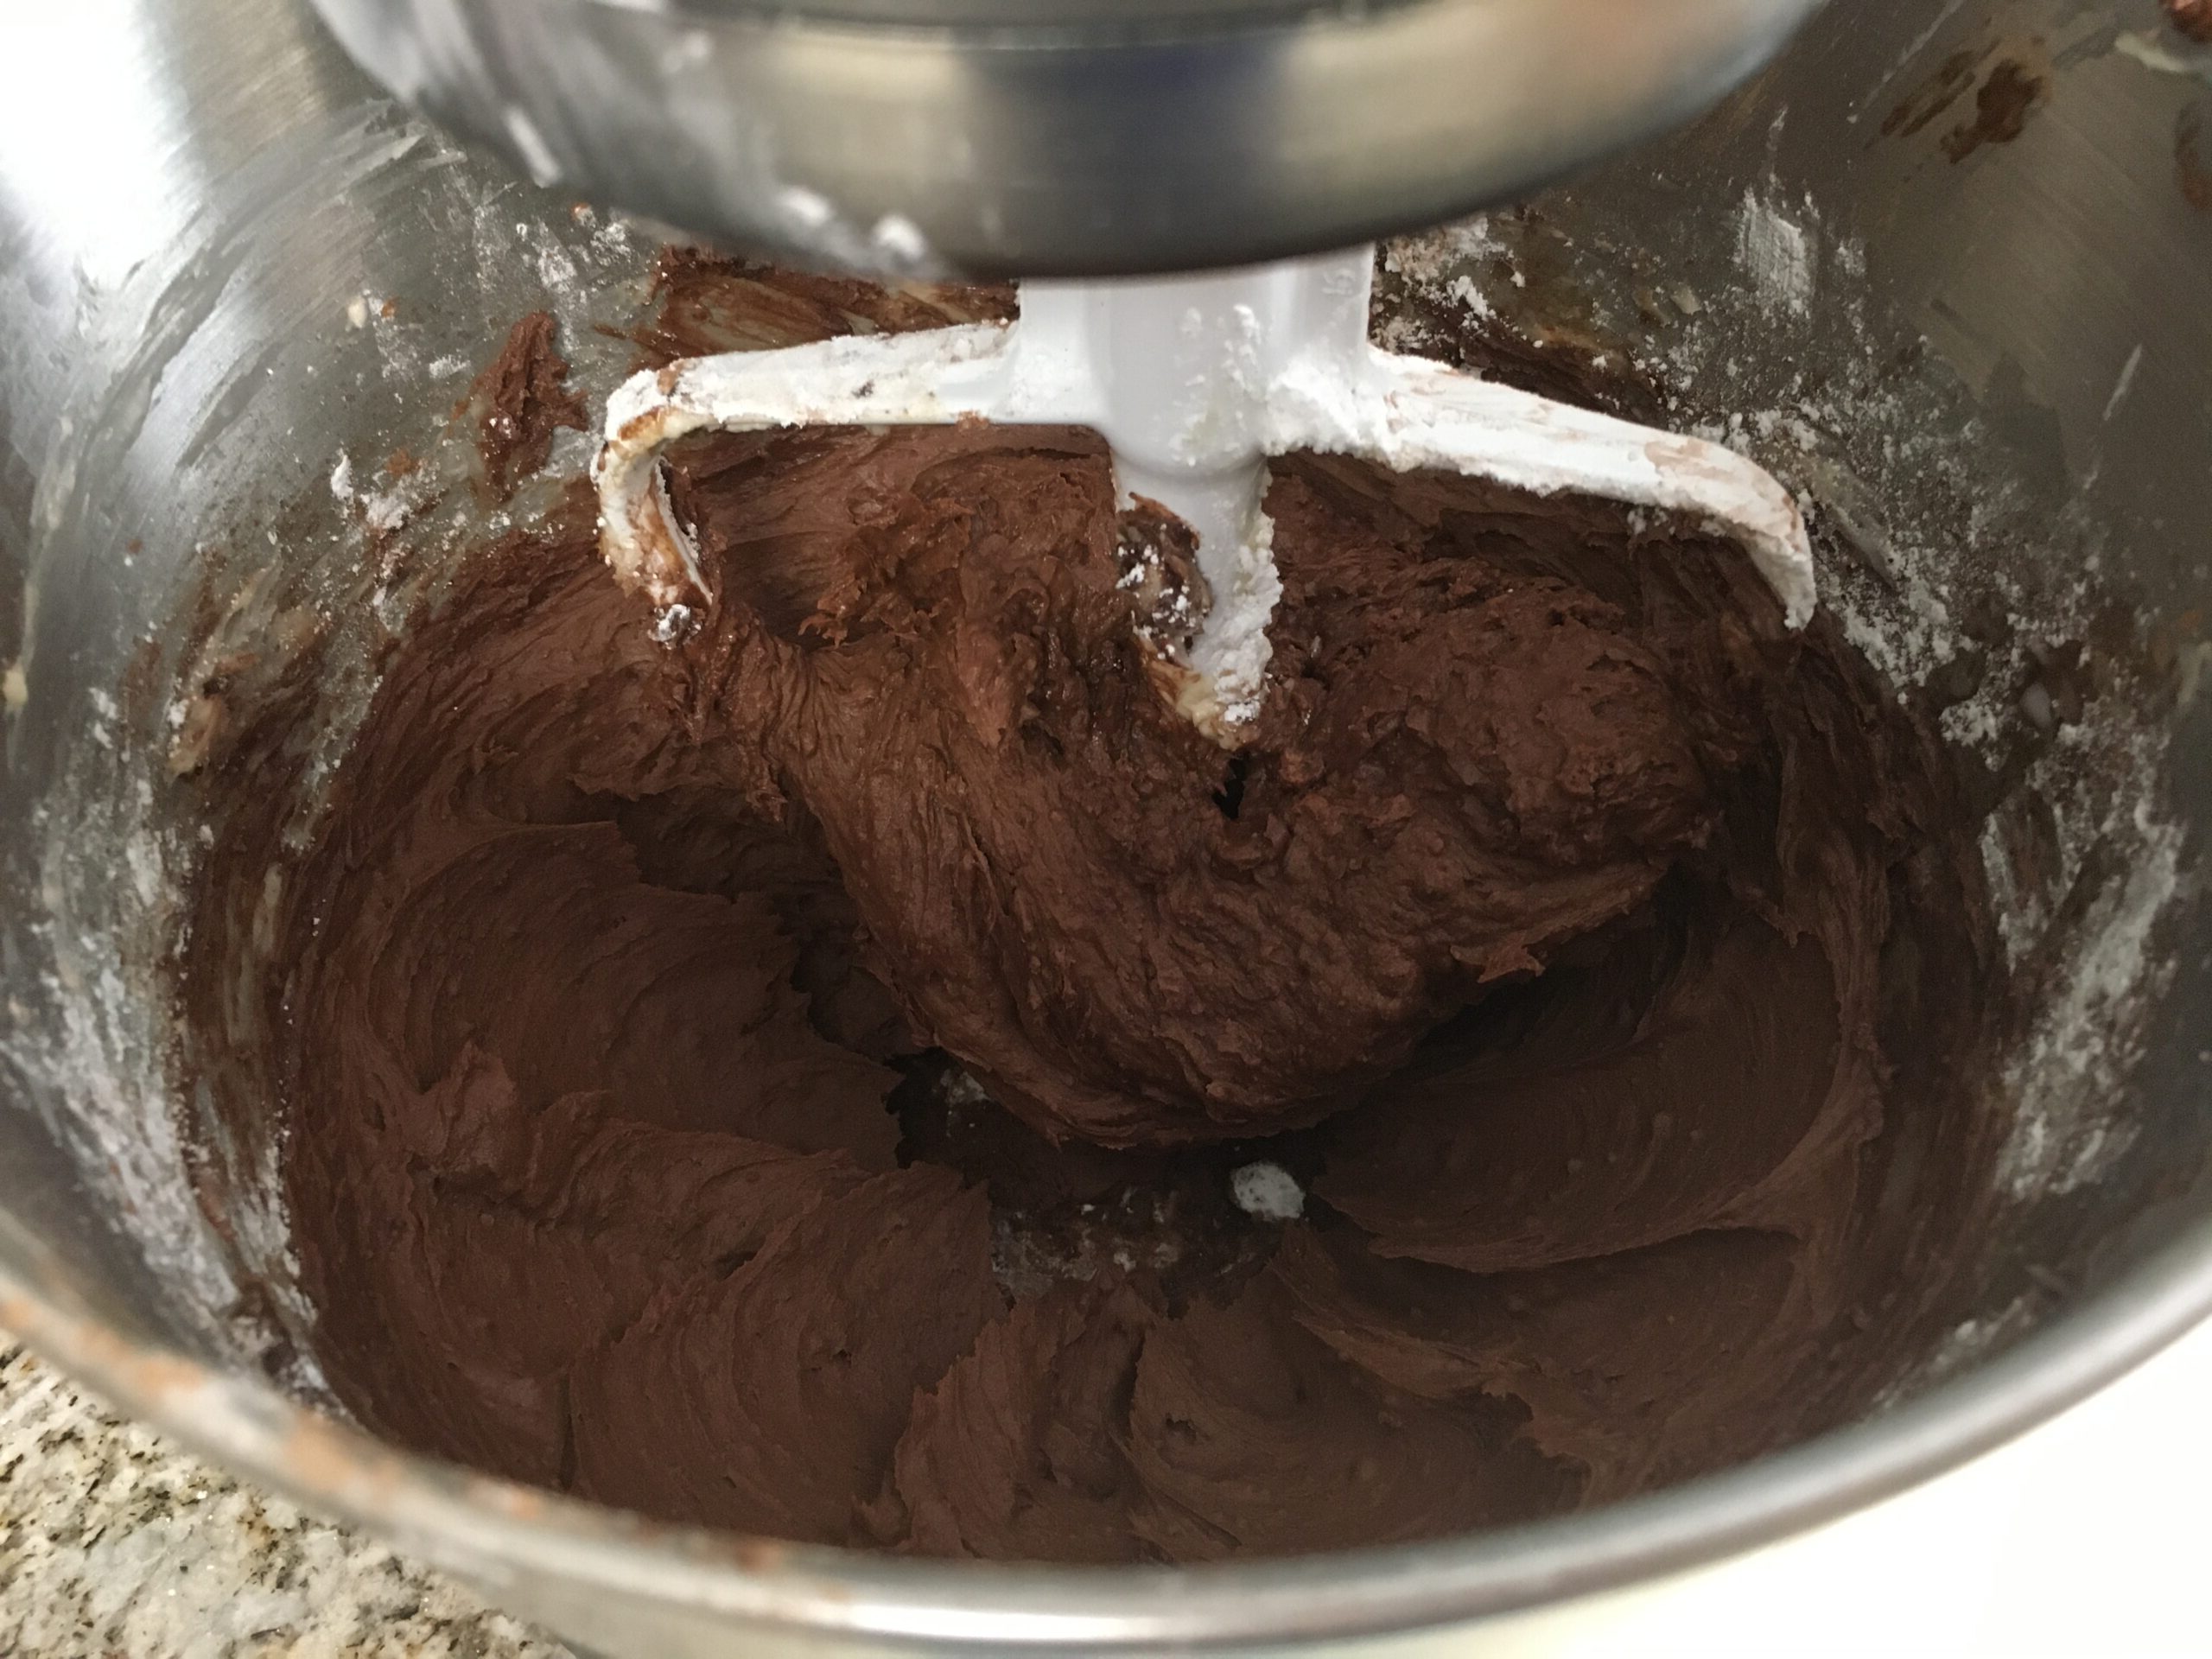 Chocolate frosting being made in a mixing bowl